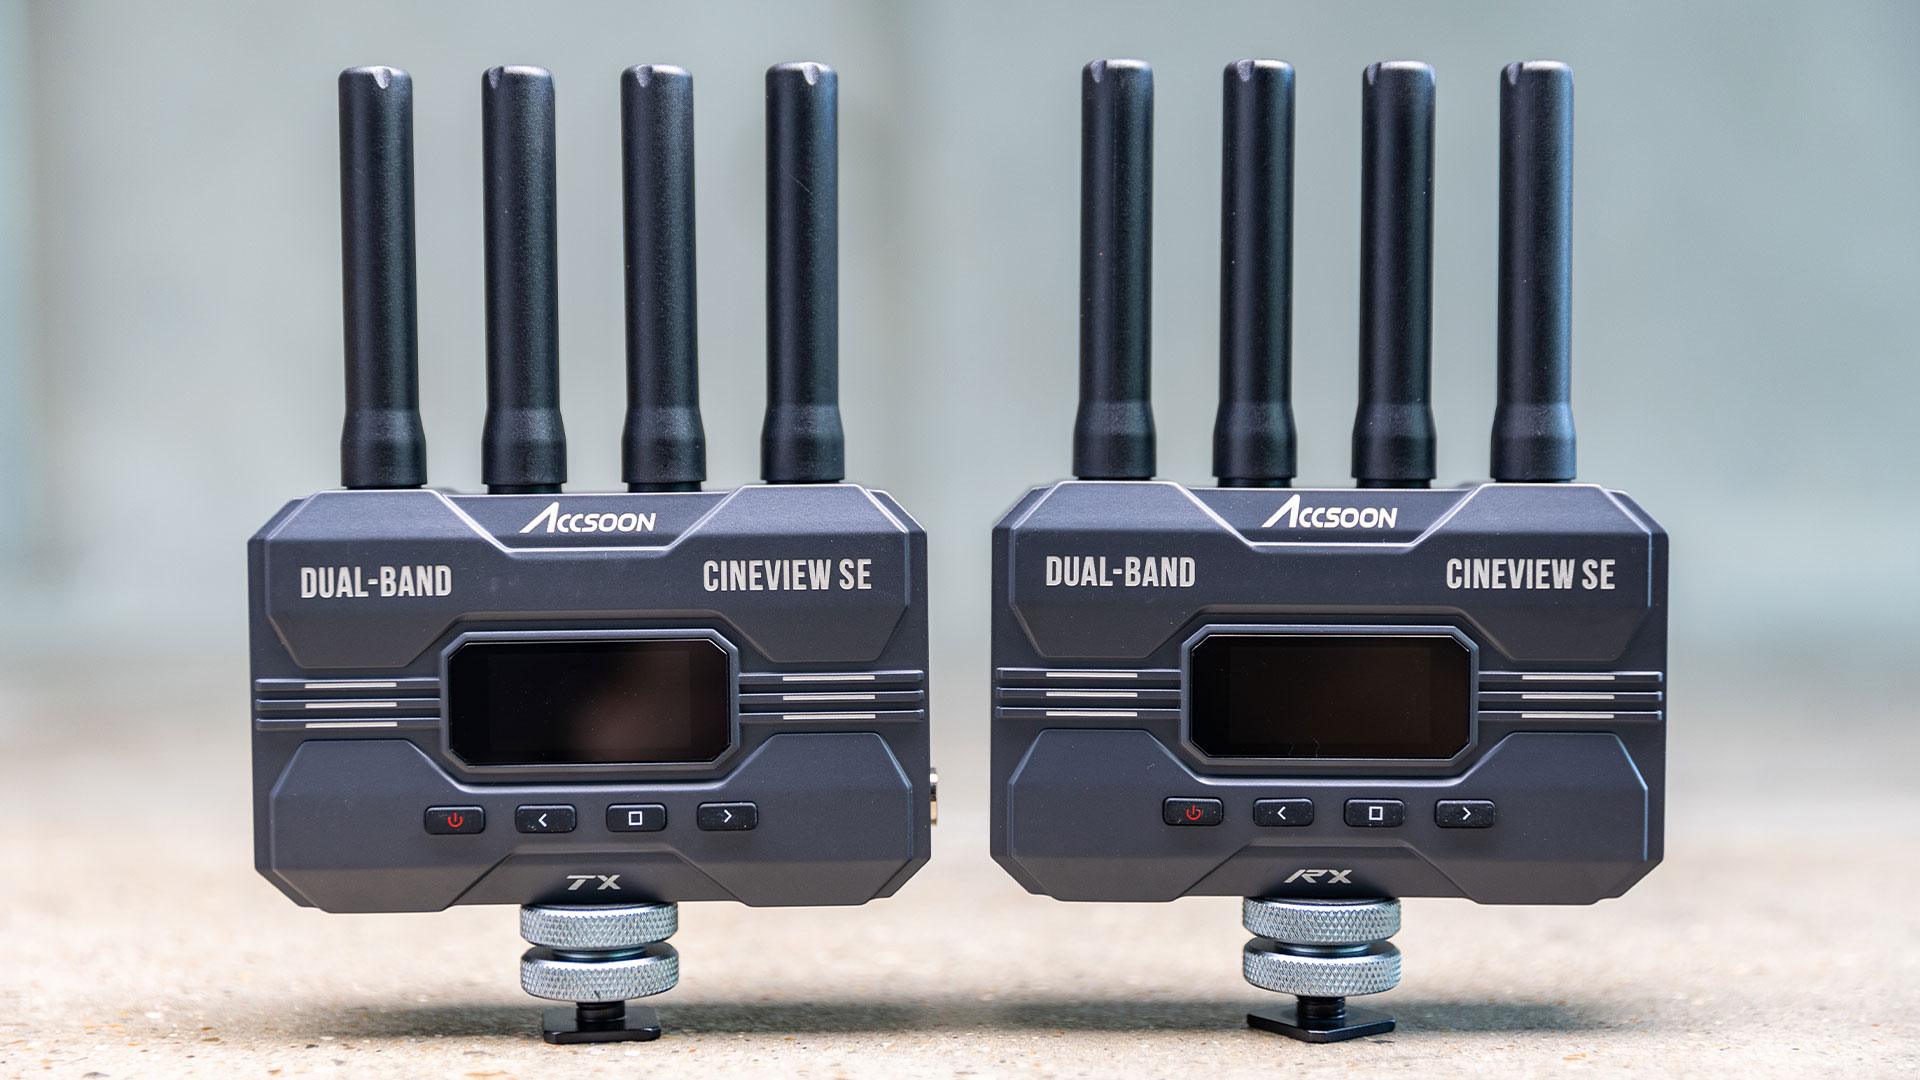 Accsoon CineView SE - Wireless SDI and HDMI Video Transmission